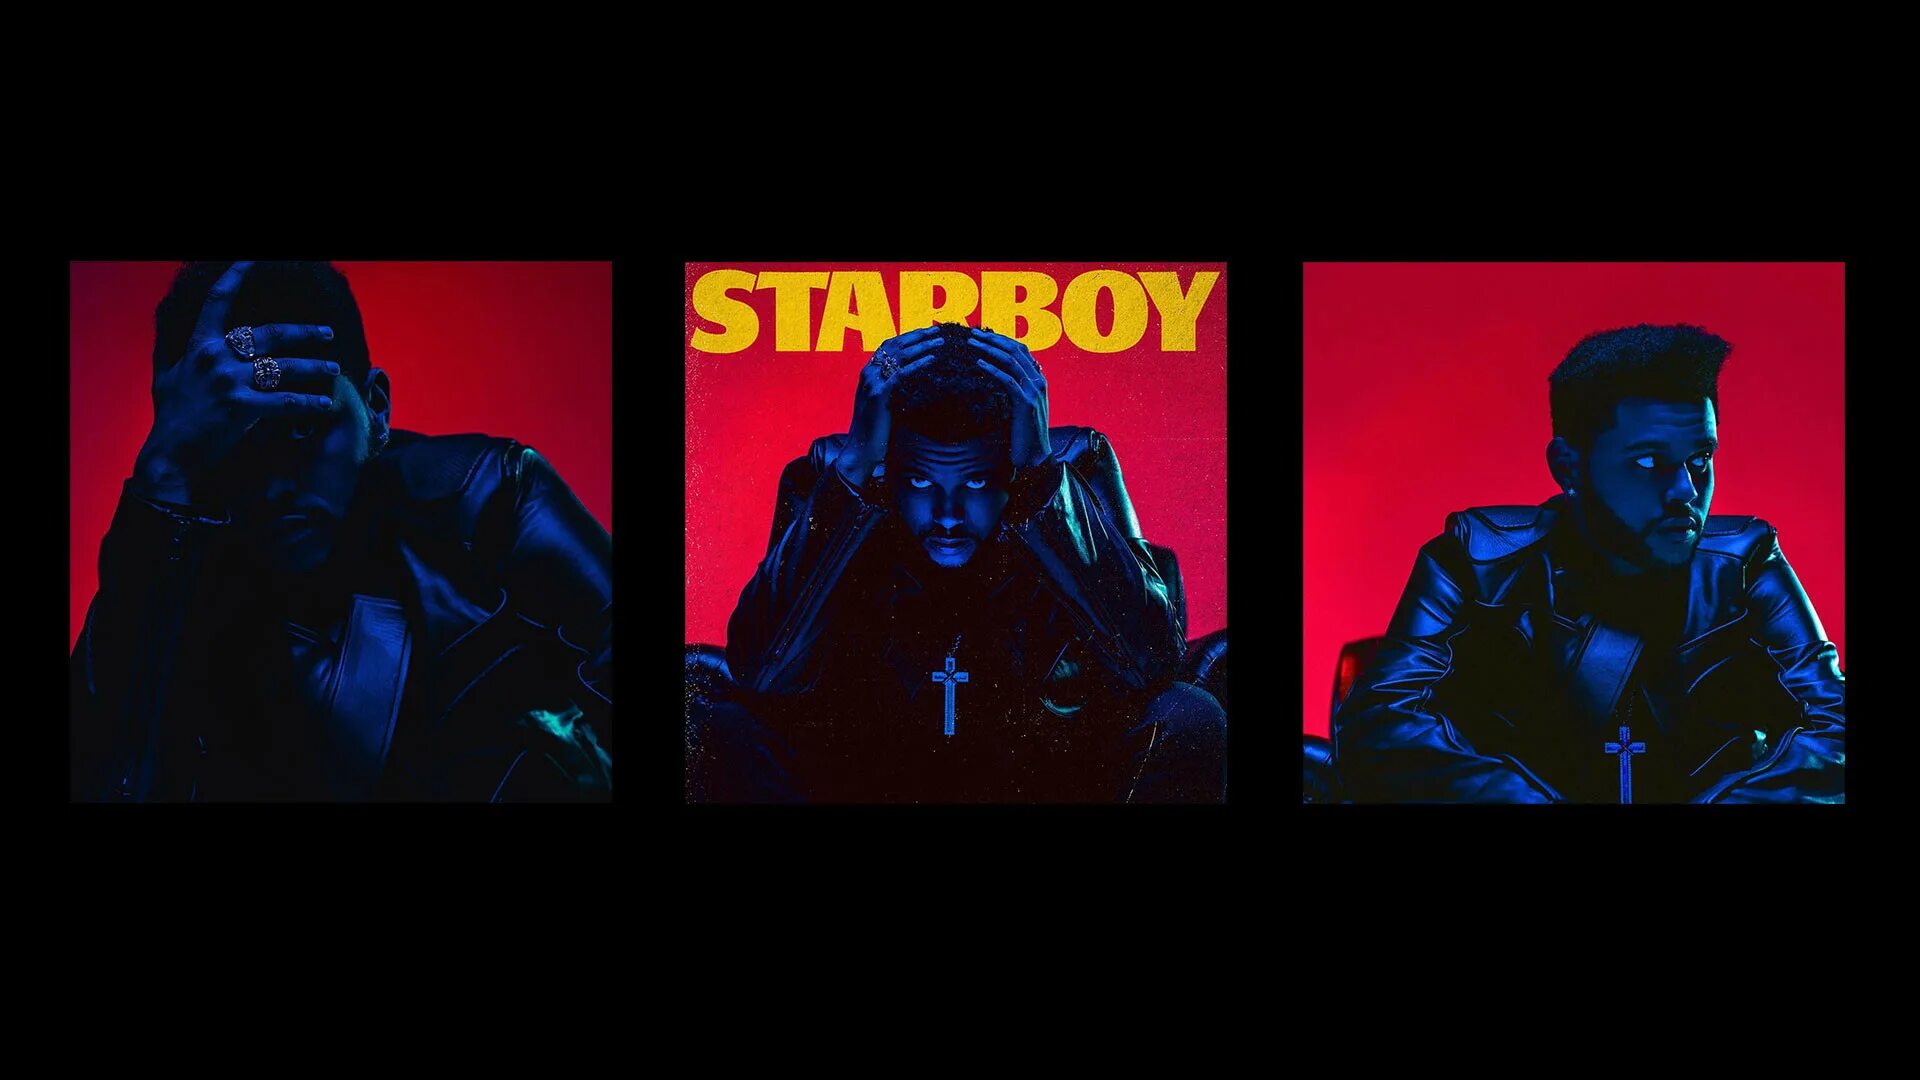 The Weeknd 2022. The Weeknd Starboy album Cover. Starboy the Weeknd обложка. The Weeknd Эстетика.